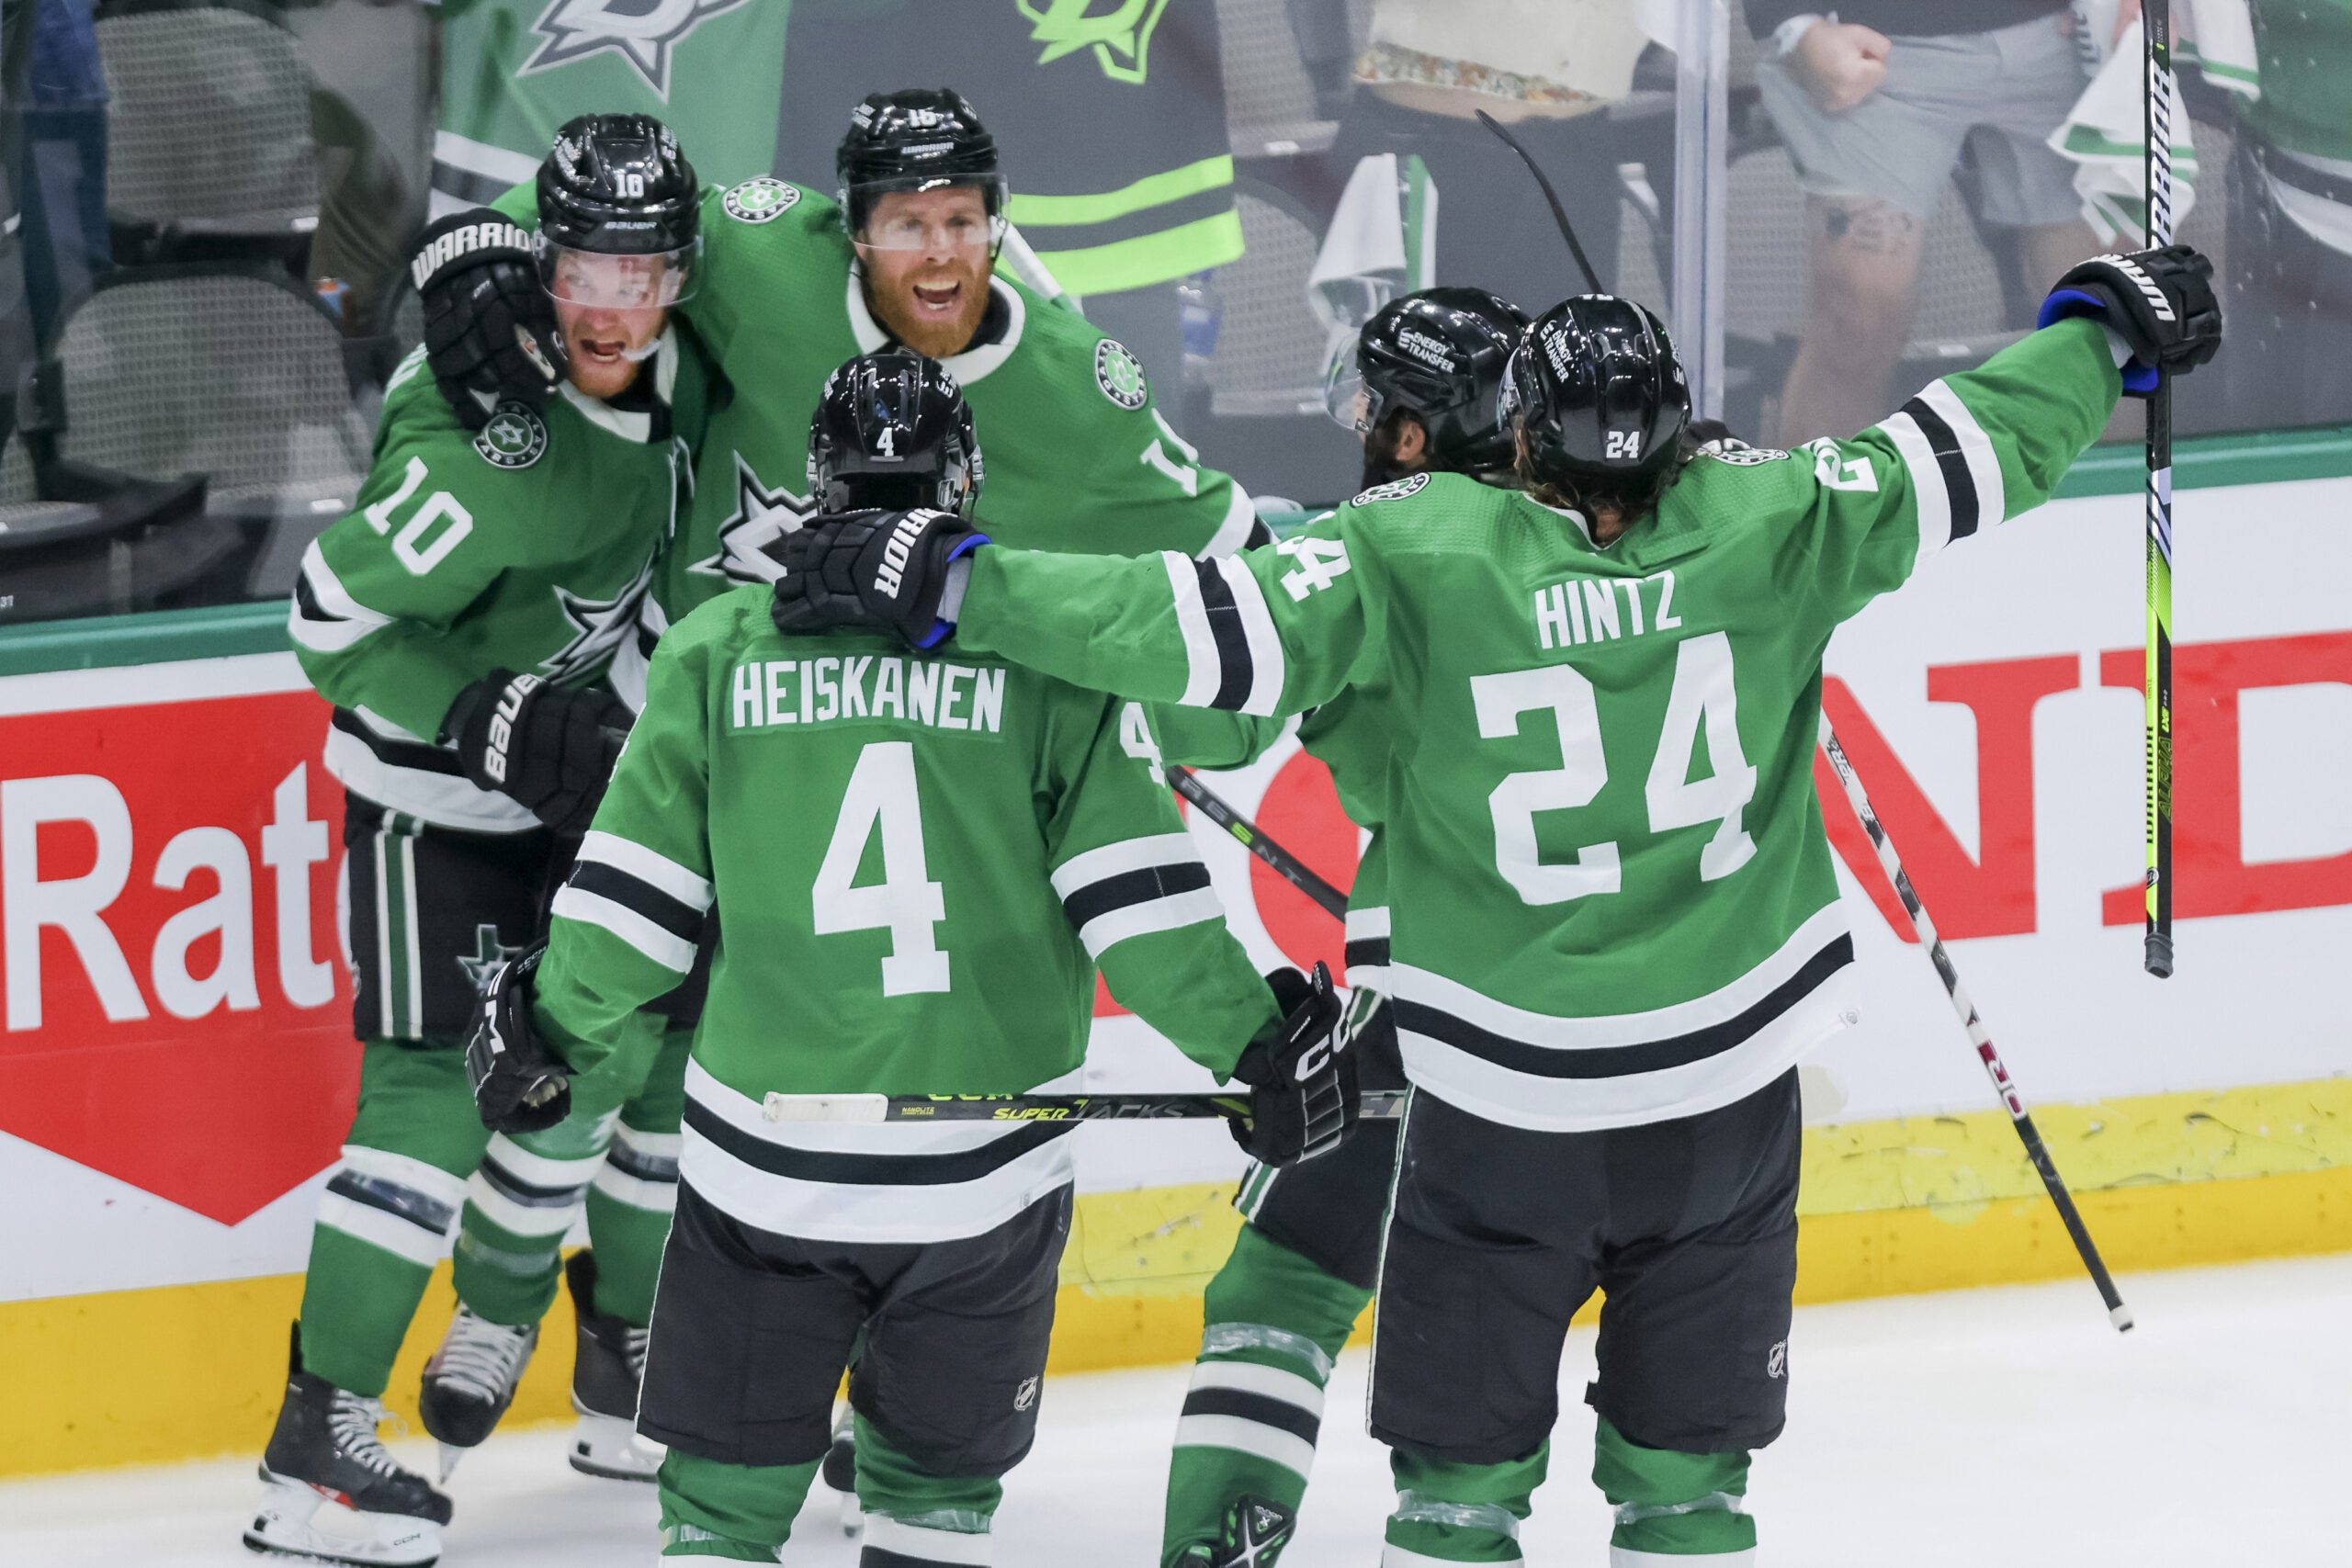 Joe Pavelski scored the game-winning overtime goal to help the Dallas Stars survive an elimination game